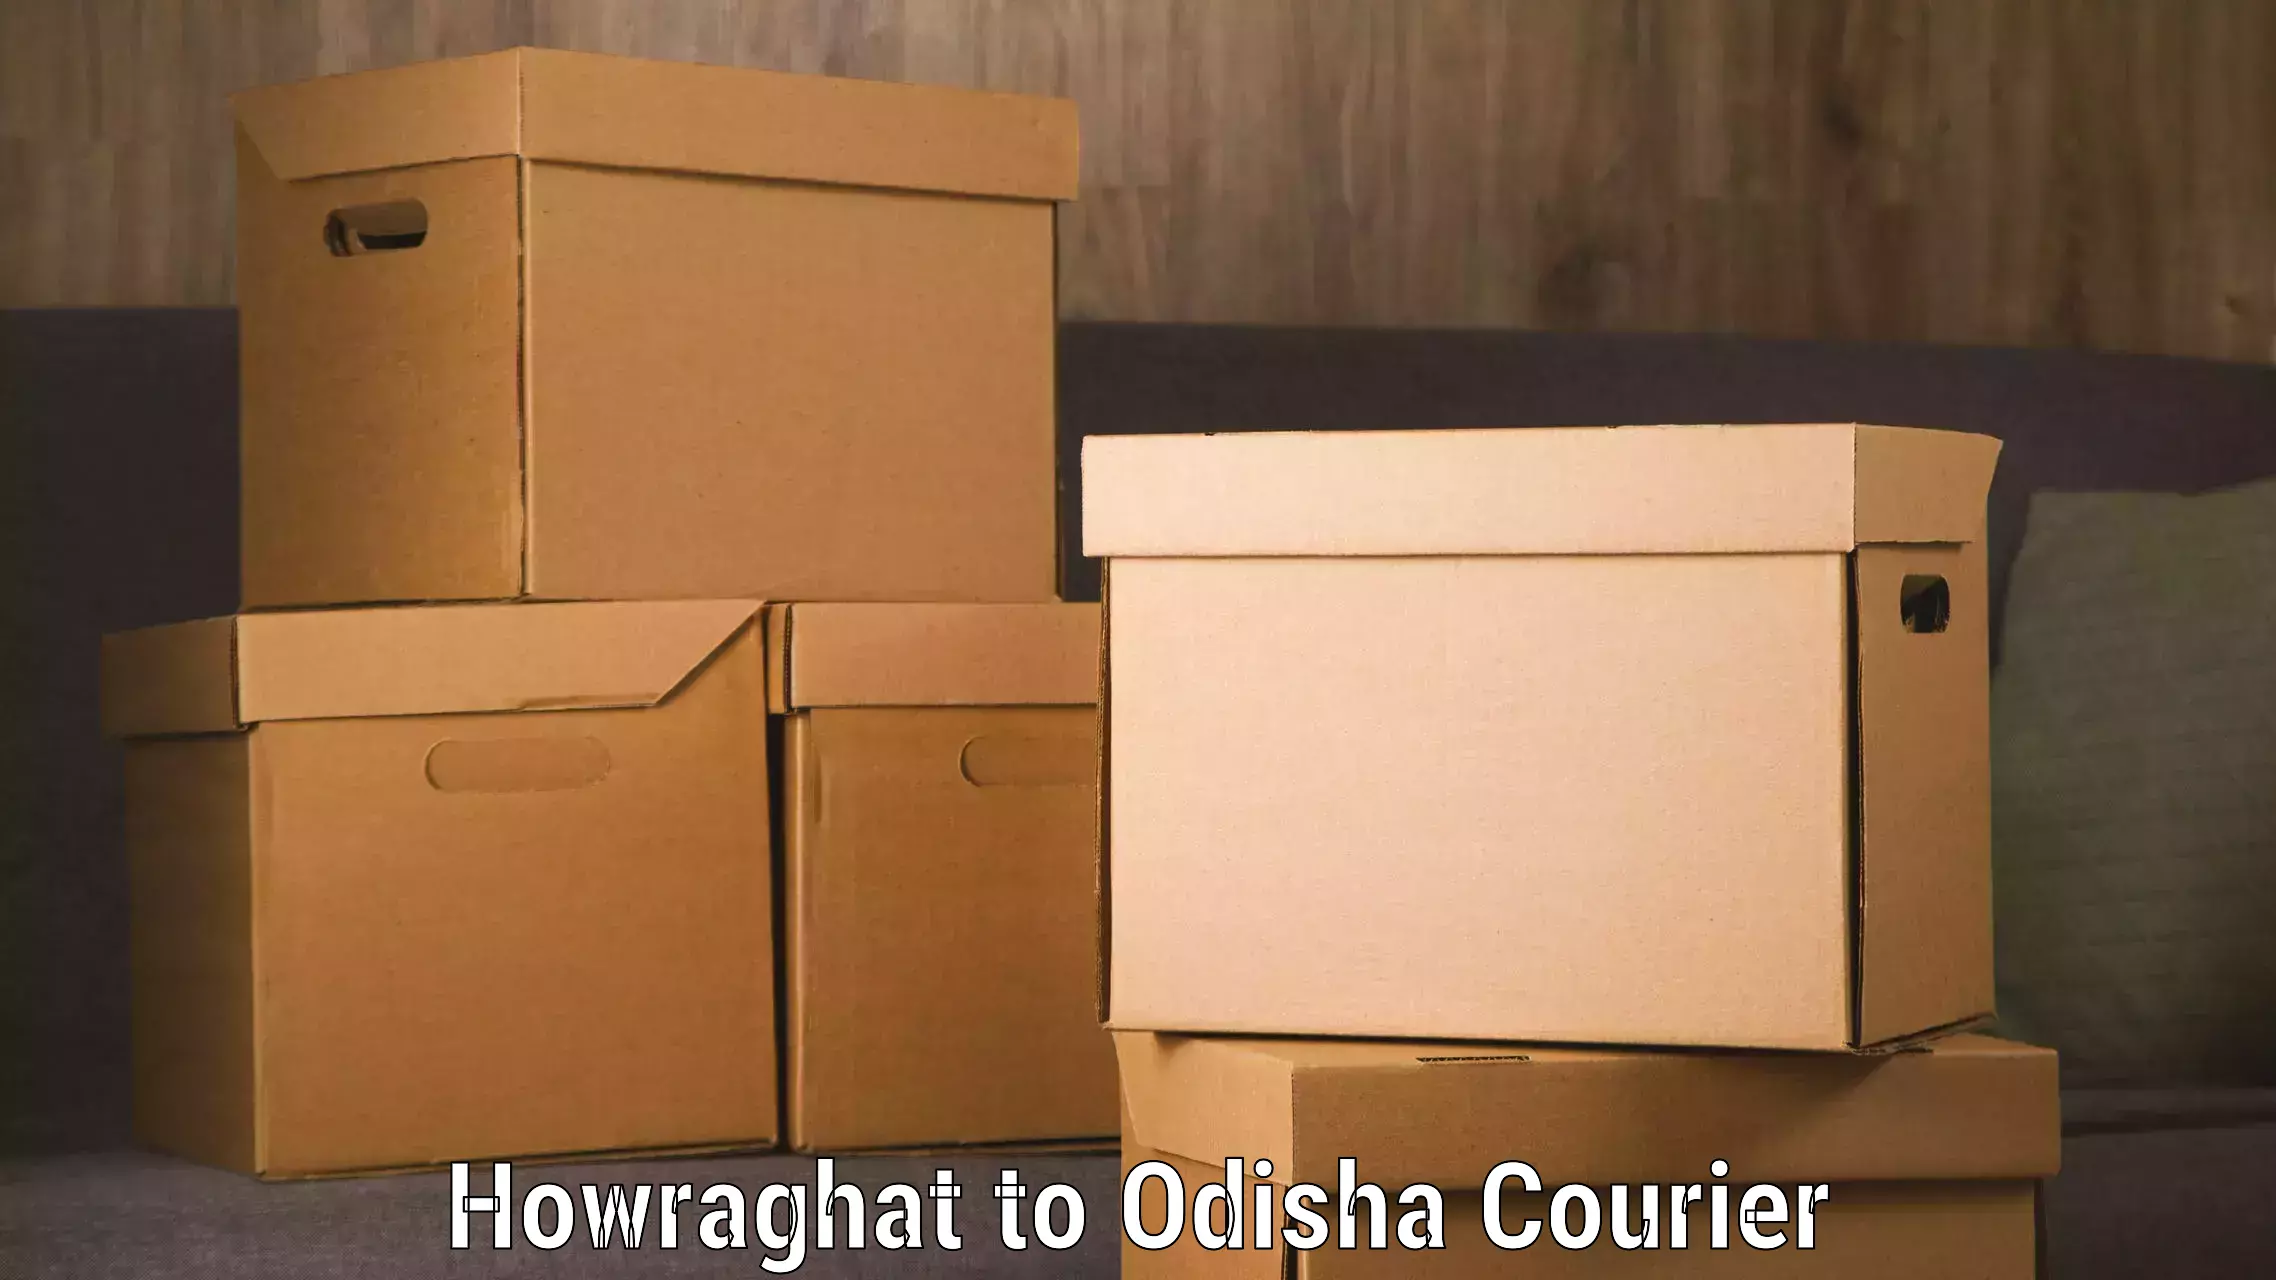 Quick luggage shipment Howraghat to Chatrapur